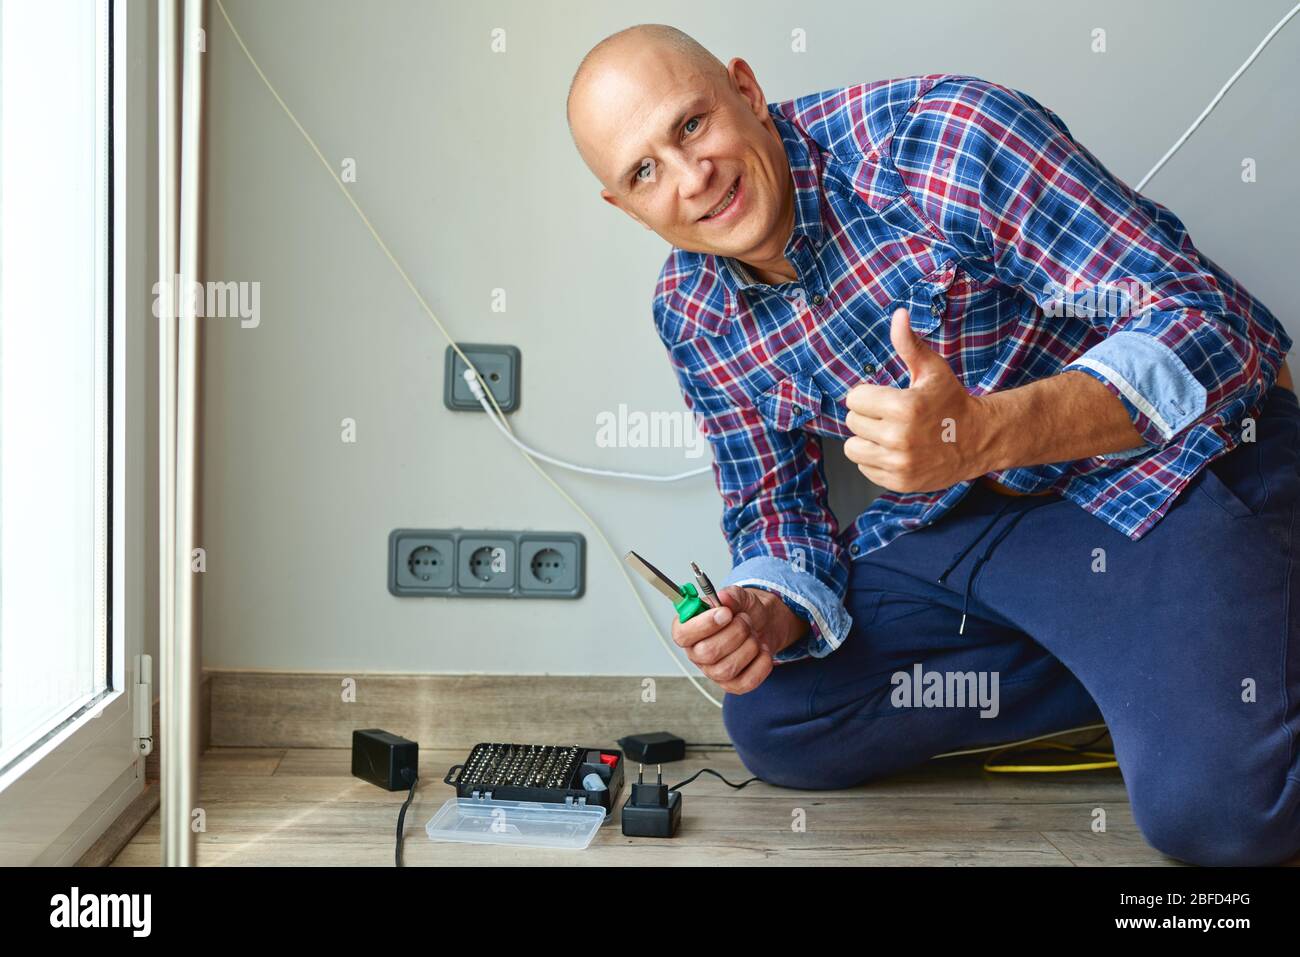 Man installing light switch after home renovation Stock Photo